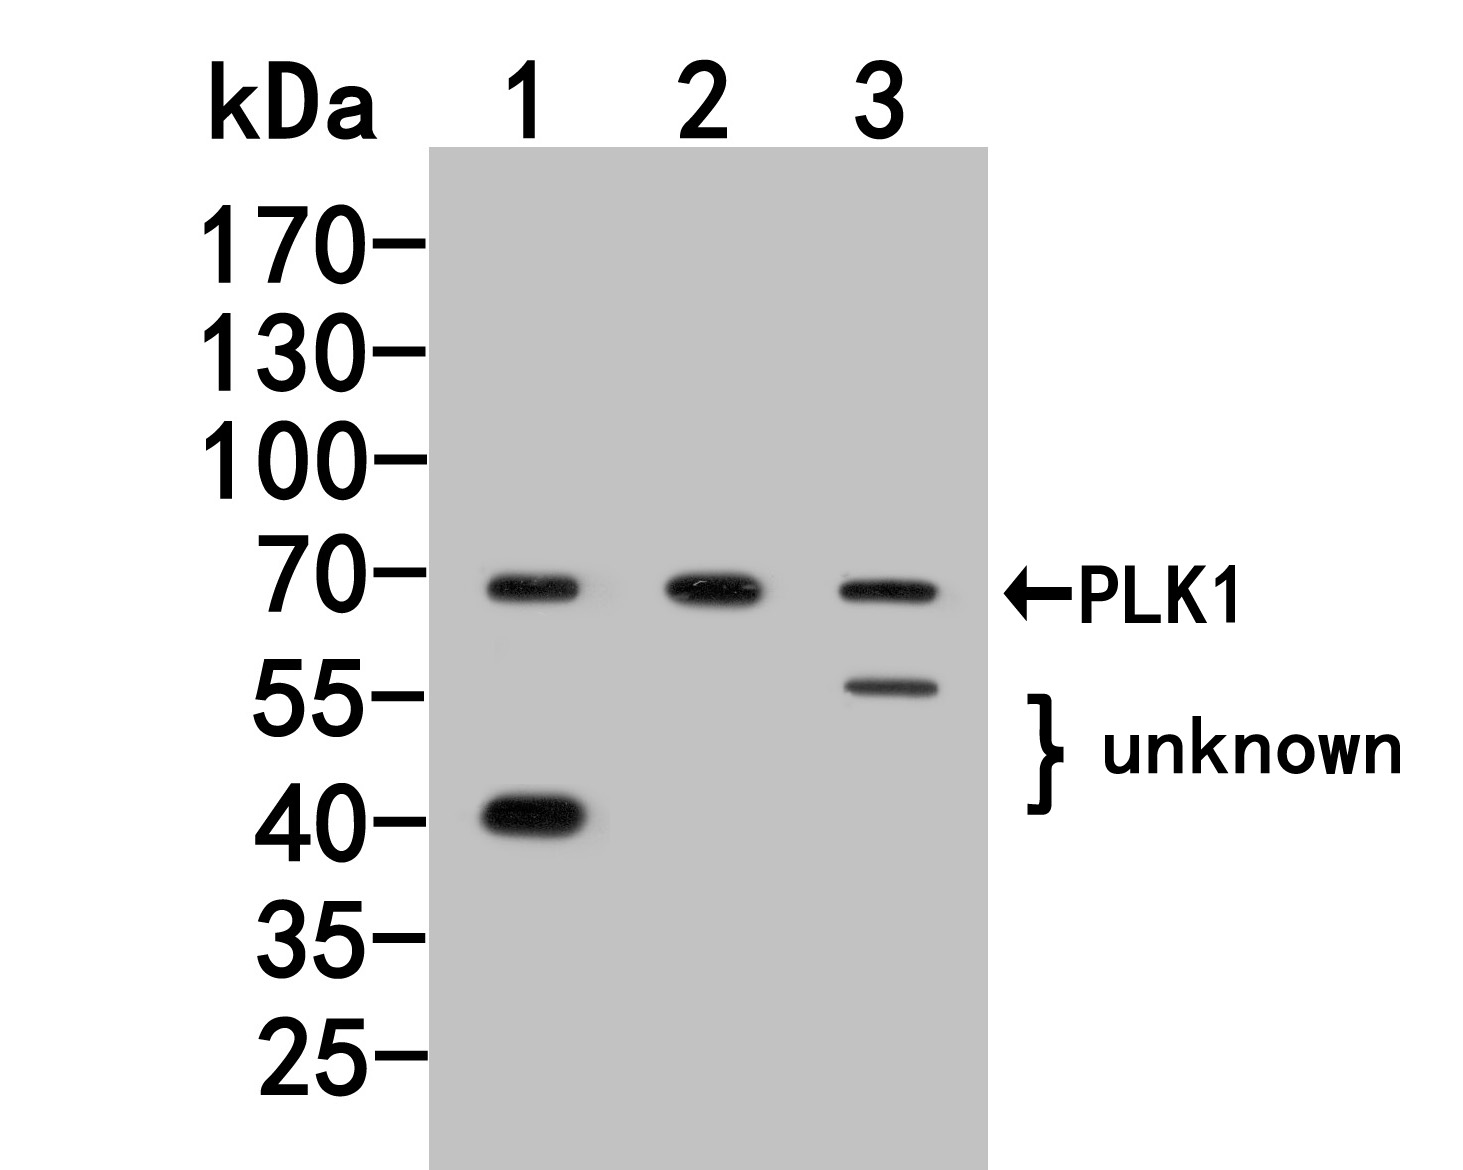 Western blot analysis of PLK1 on different lysates. Proteins were transferred to a PVDF membrane and blocked with 5% NFDM/TBST for 1 hour at room temperature. The primary antibody (HA500281, 1/1,000) was used in 5% NFDM/TBST at room temperature for 2 hours. Goat Anti-Rabbit IgG - HRP Secondary Antibody (HA1001) at 1:200,000 dilution was used for 1 hour at room temperature.<br />
Positive control: <br />
Lane 1: HepG2 cell lysate<br />
Lane 2: Hela cell lysate<br />
Lane 3: Mouse testis tissue lysate<br />
<br />
Predicted band size: 68 kDa<br />
Observed band size: 68/55/40 kDa